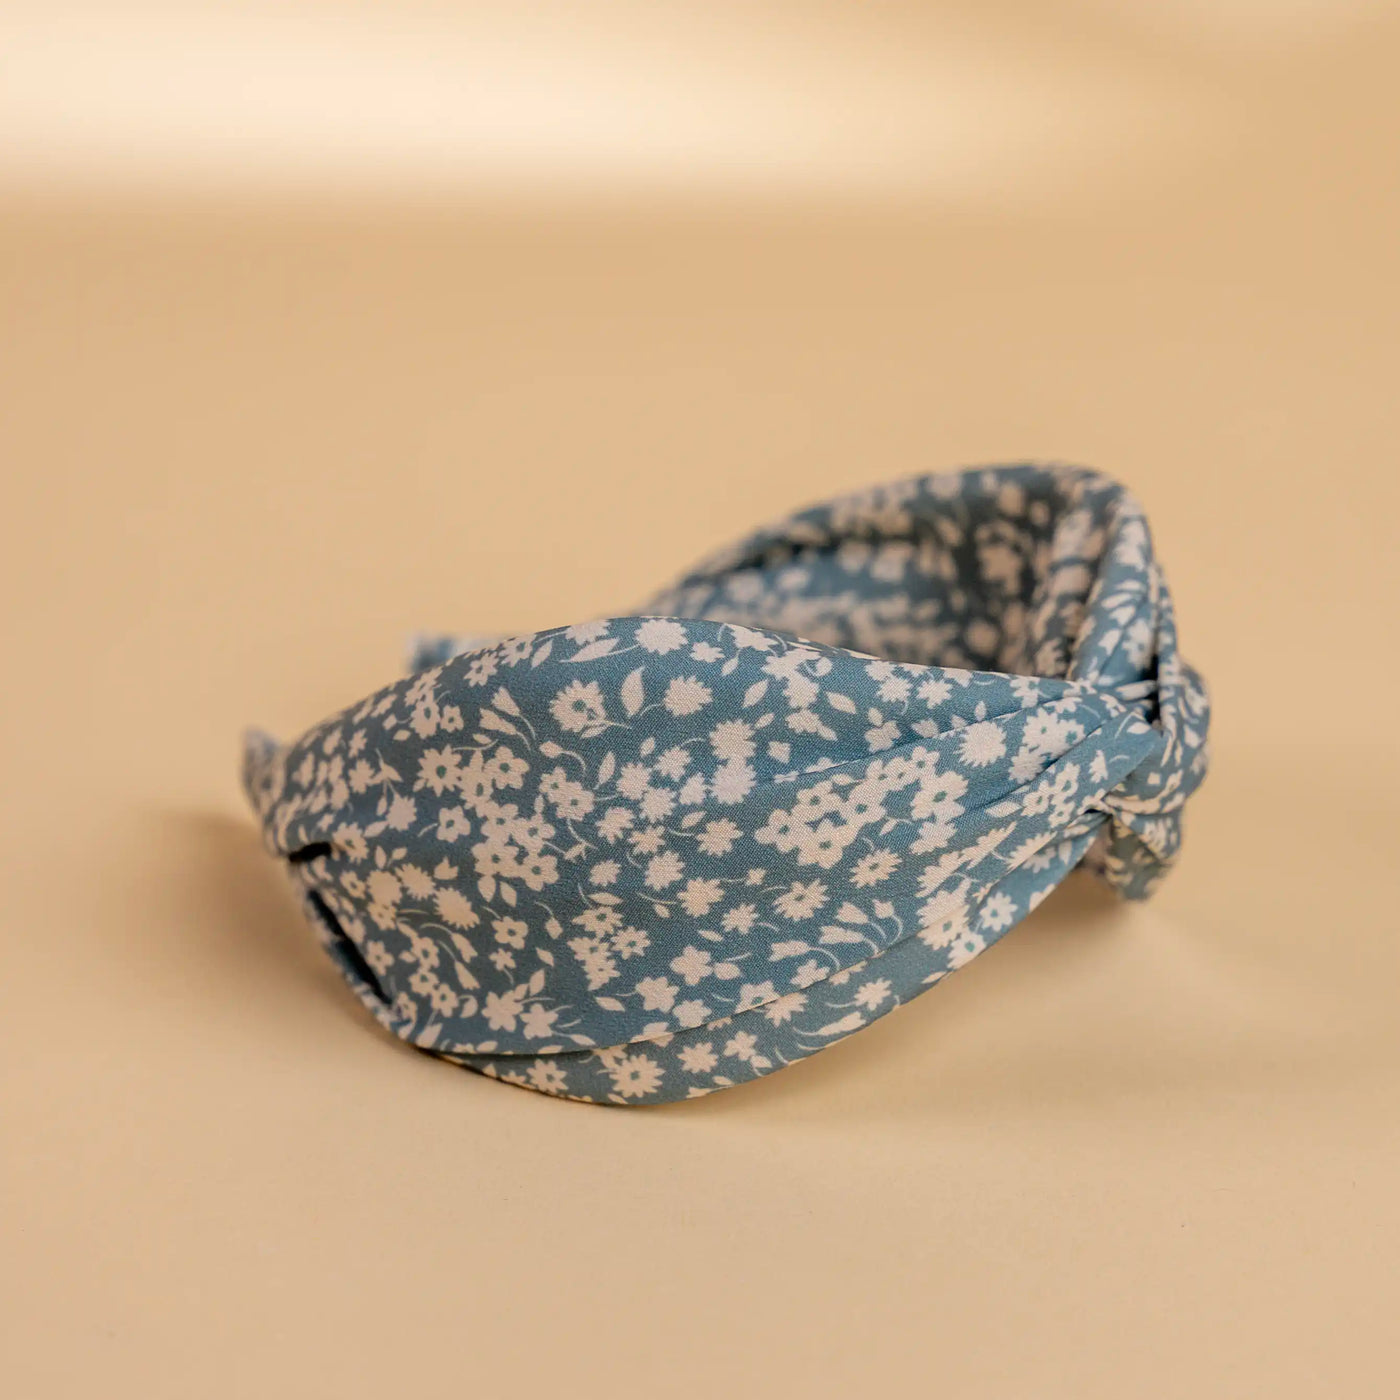 Lucys blue and white simple floral headband. Light blue background with simple white floral pattern. Side view.